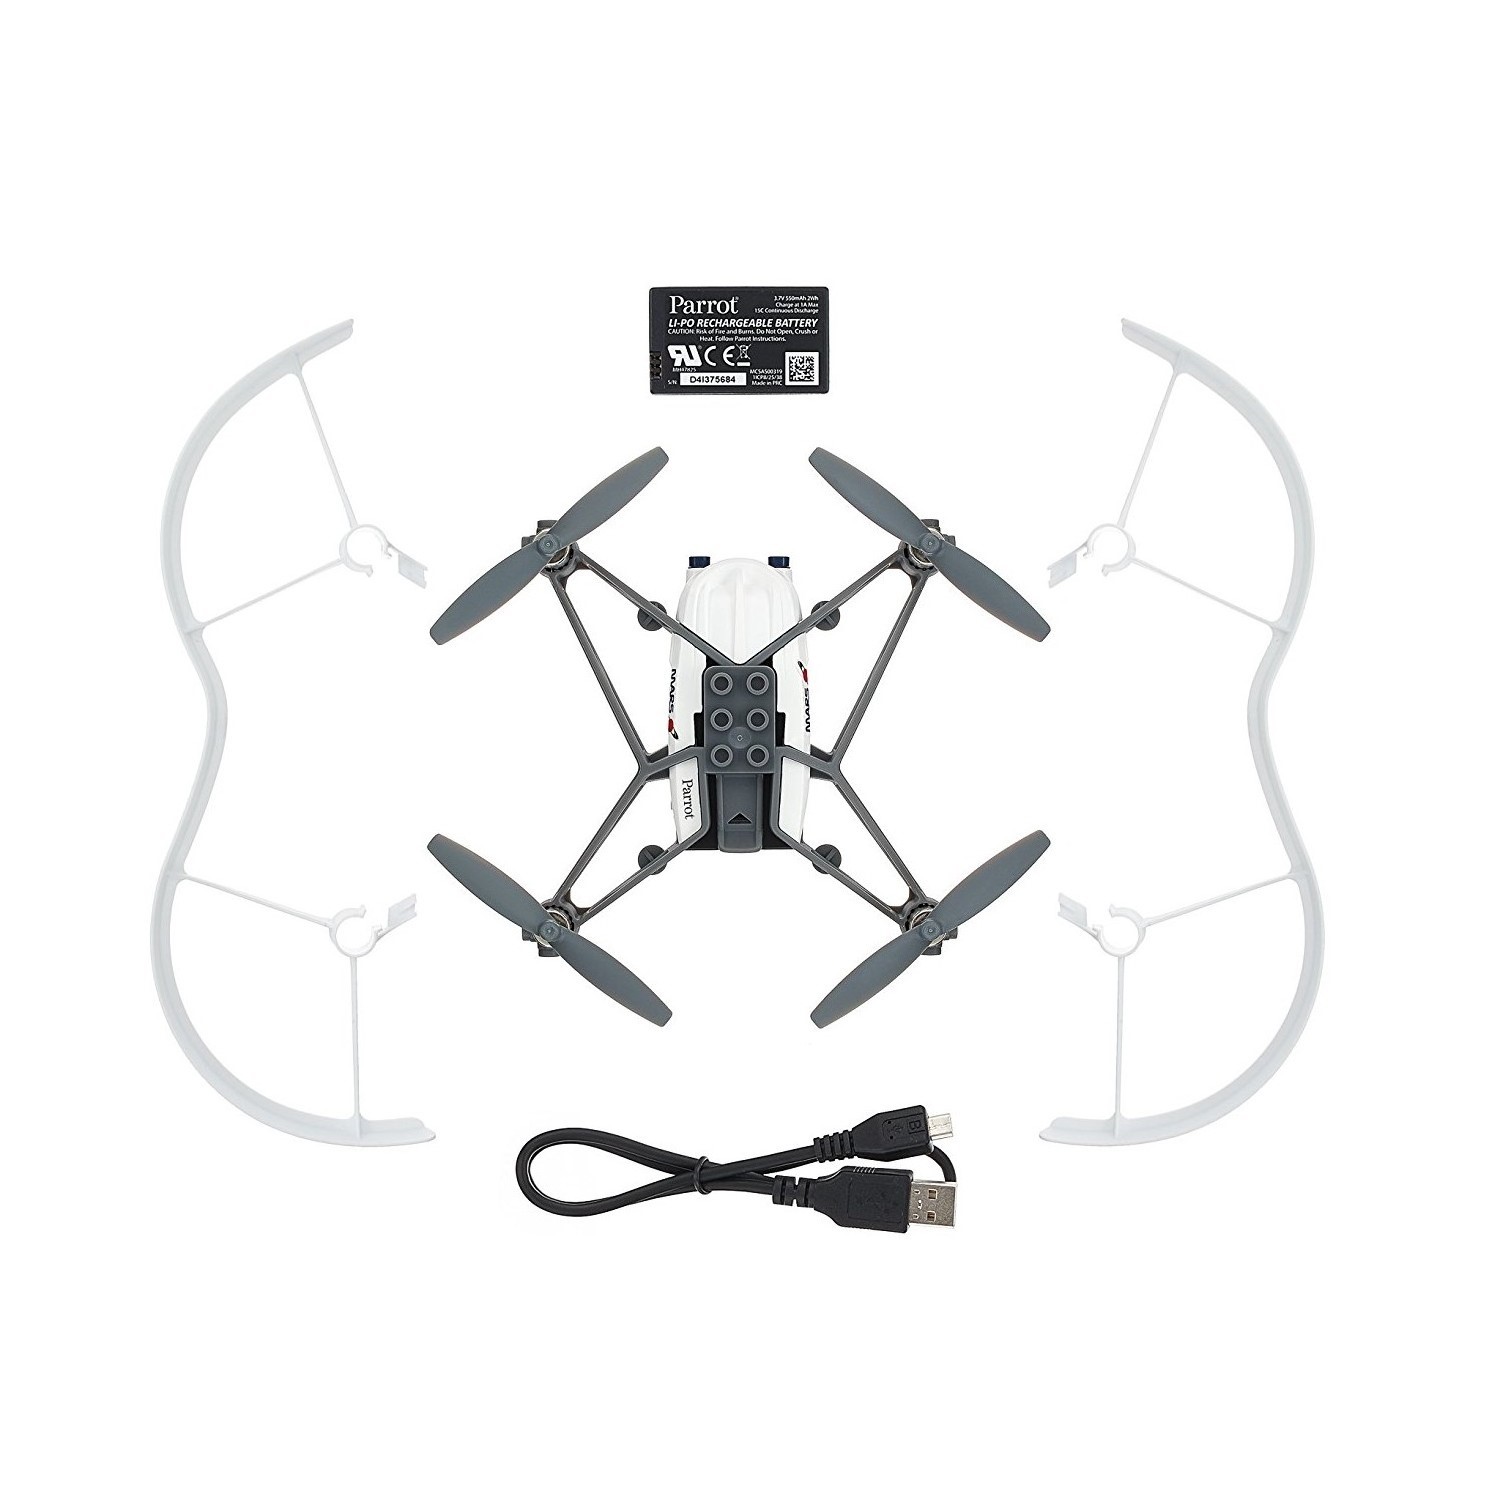 Hus Vædde samle Parrot Airborne Cargo Mars Grey Toy Drone PF723301AA | Drones Direct